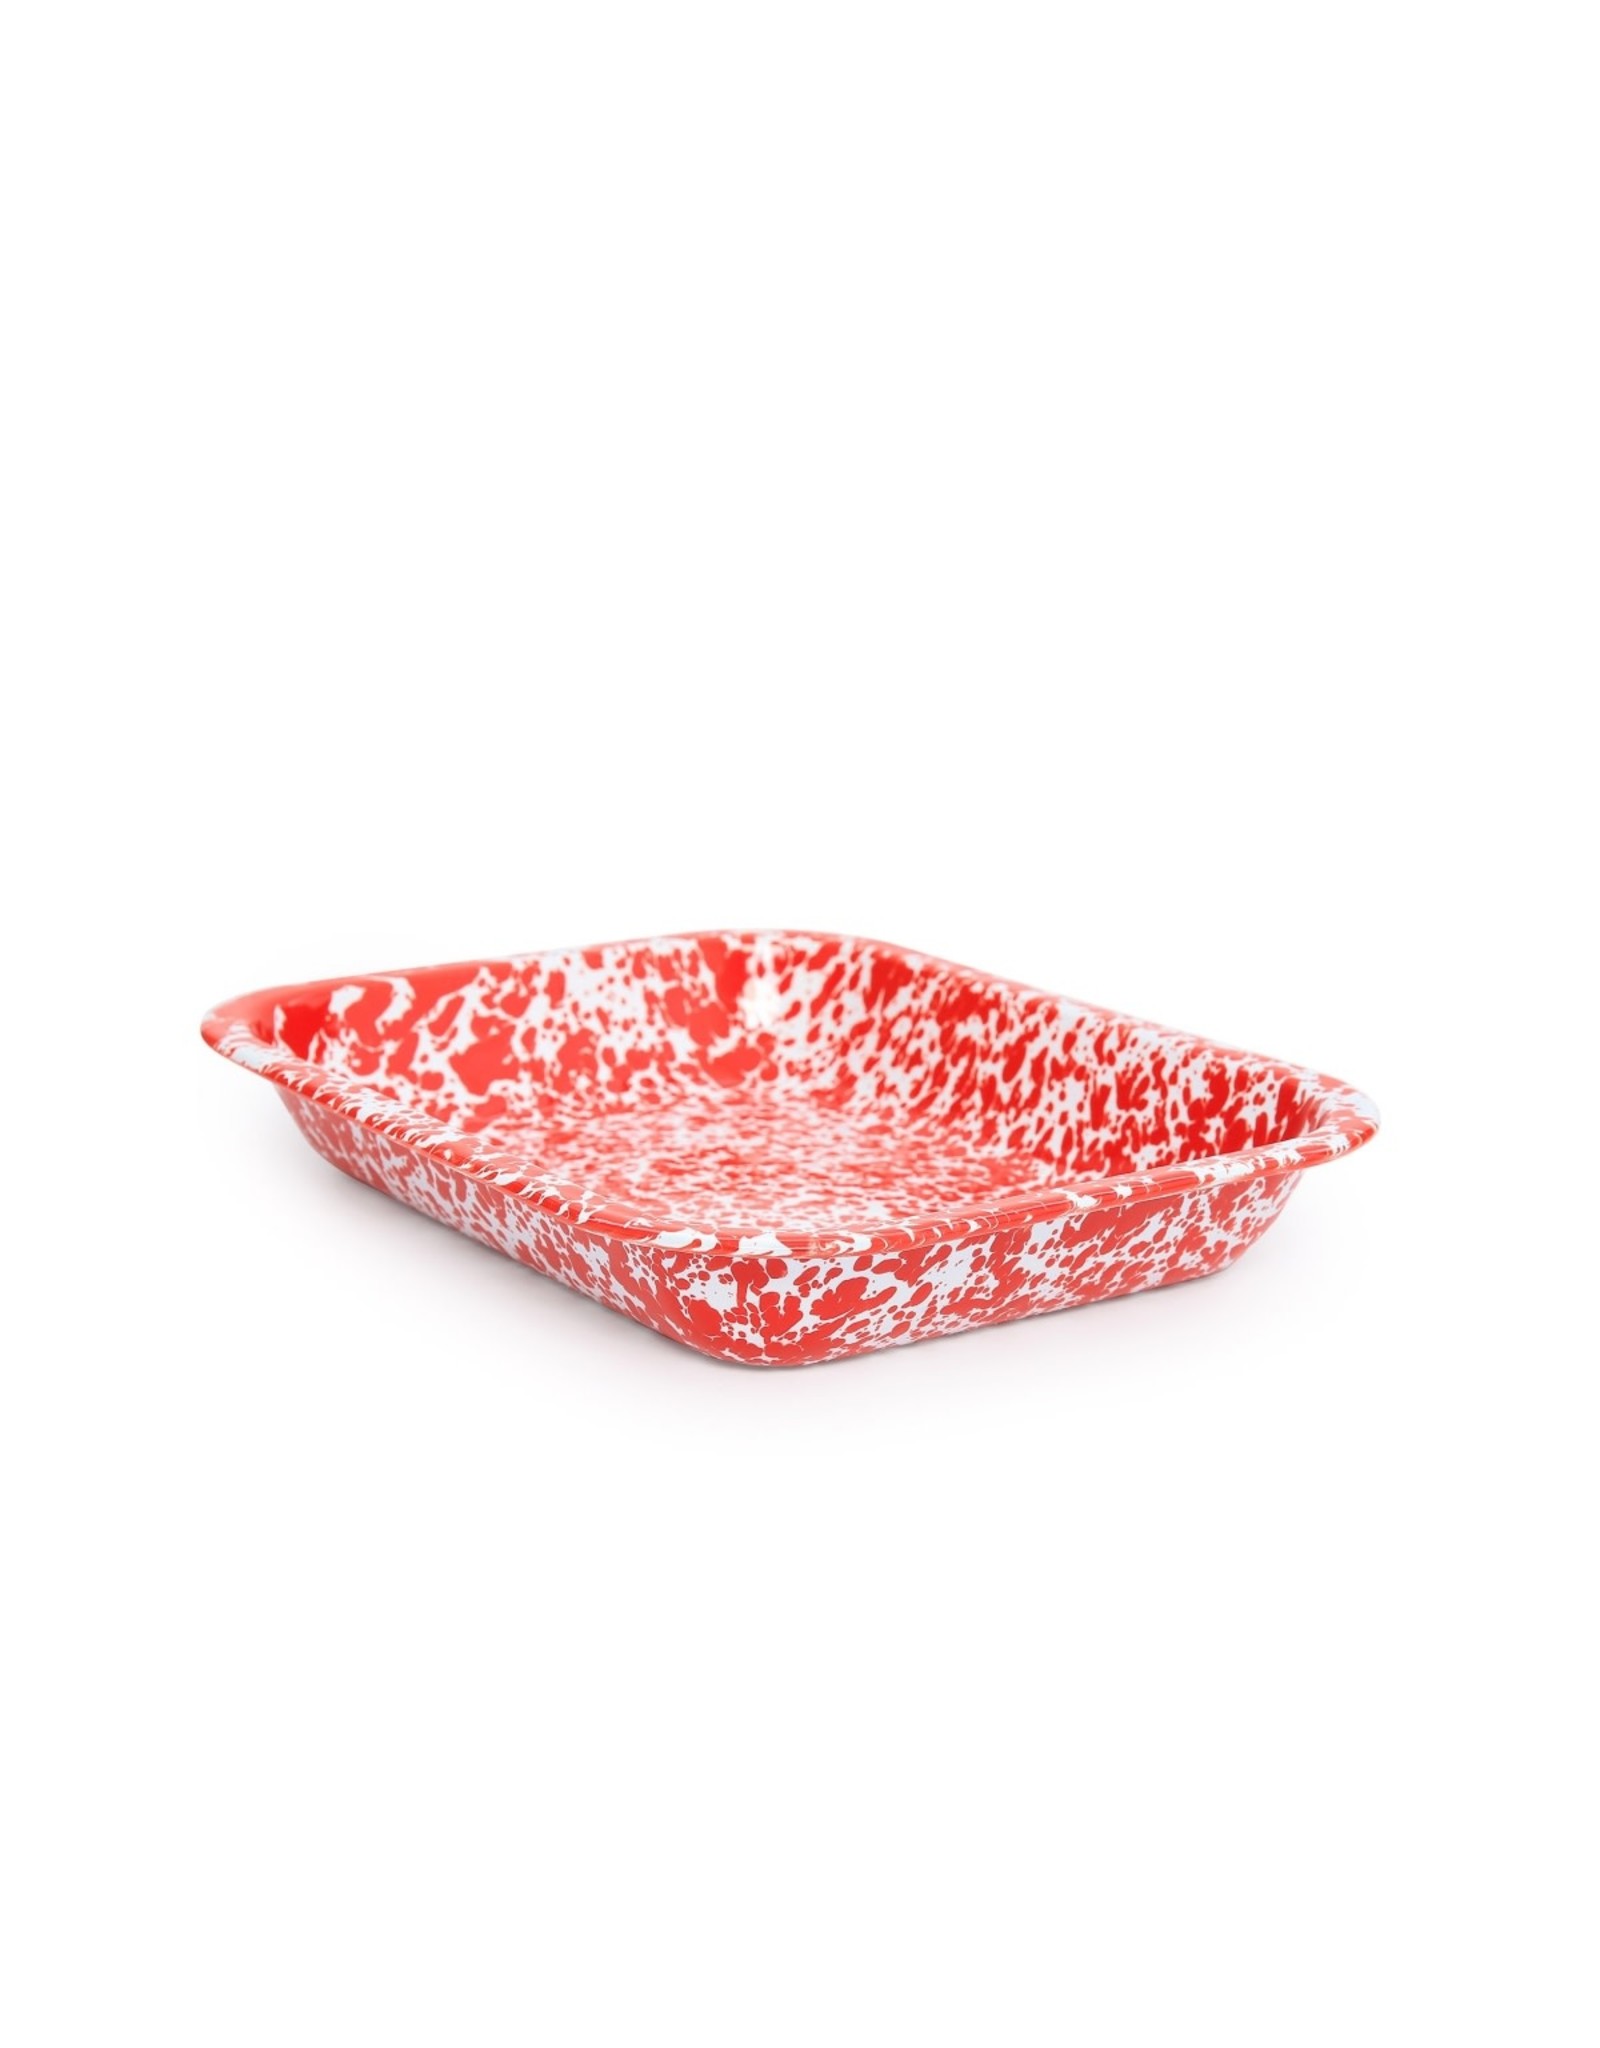 Kitchen Crow Canyon - Small Open Roasting Pan Red Marble